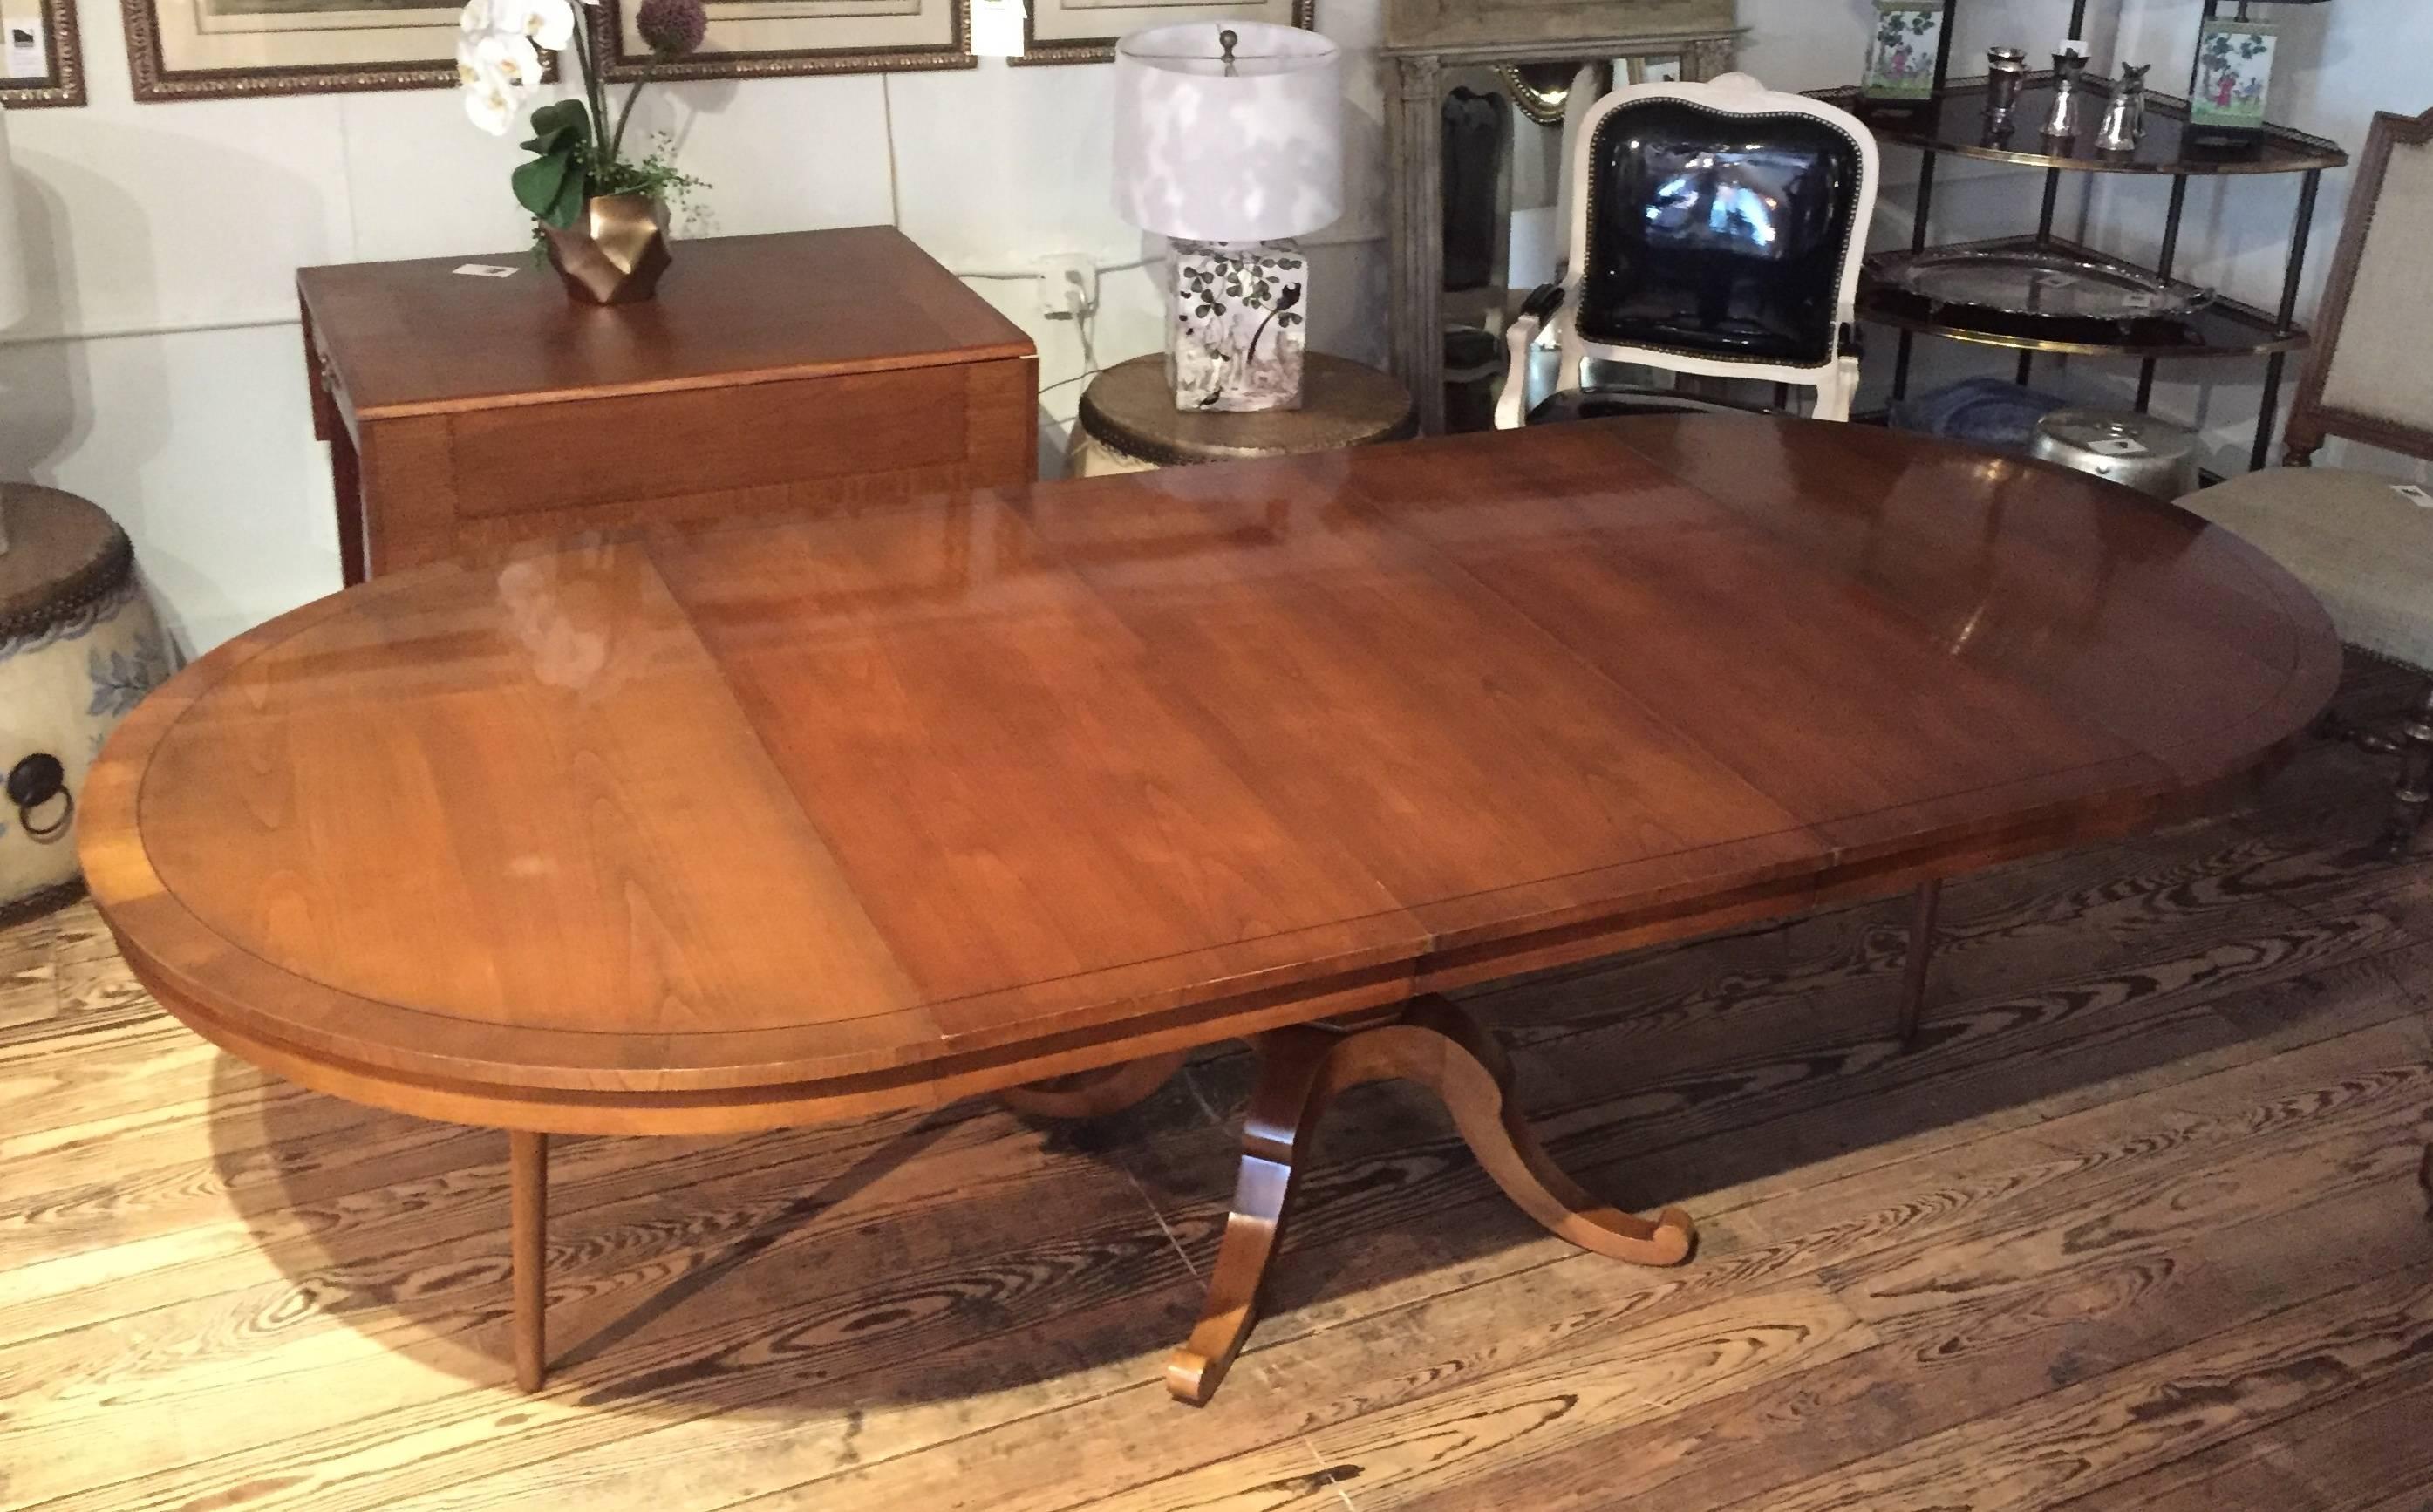 Fabulously expandable or shrinkable dining table,...4 ft round at its smallest, and then ingeniously pulls apart to make room for three leaves to create an elegant very long oval. Each leaf is 18 inches.  Has just been restored so in beautiful